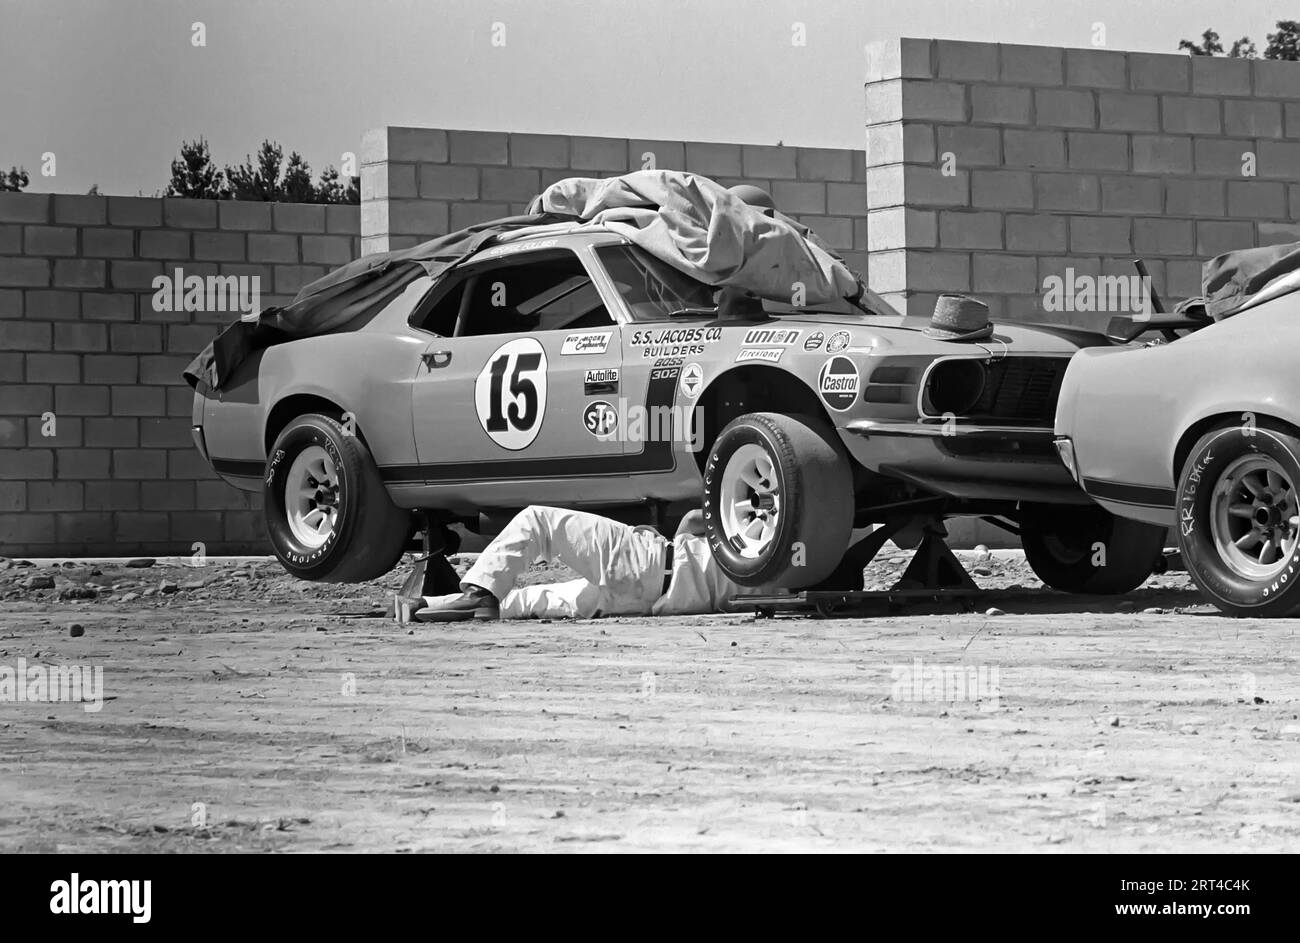 1971 Watkins Glen Trans Am,   Ford Mustang Boss 302,  #15 George Follmer Started 1st, Finished 2nd Stock Photo